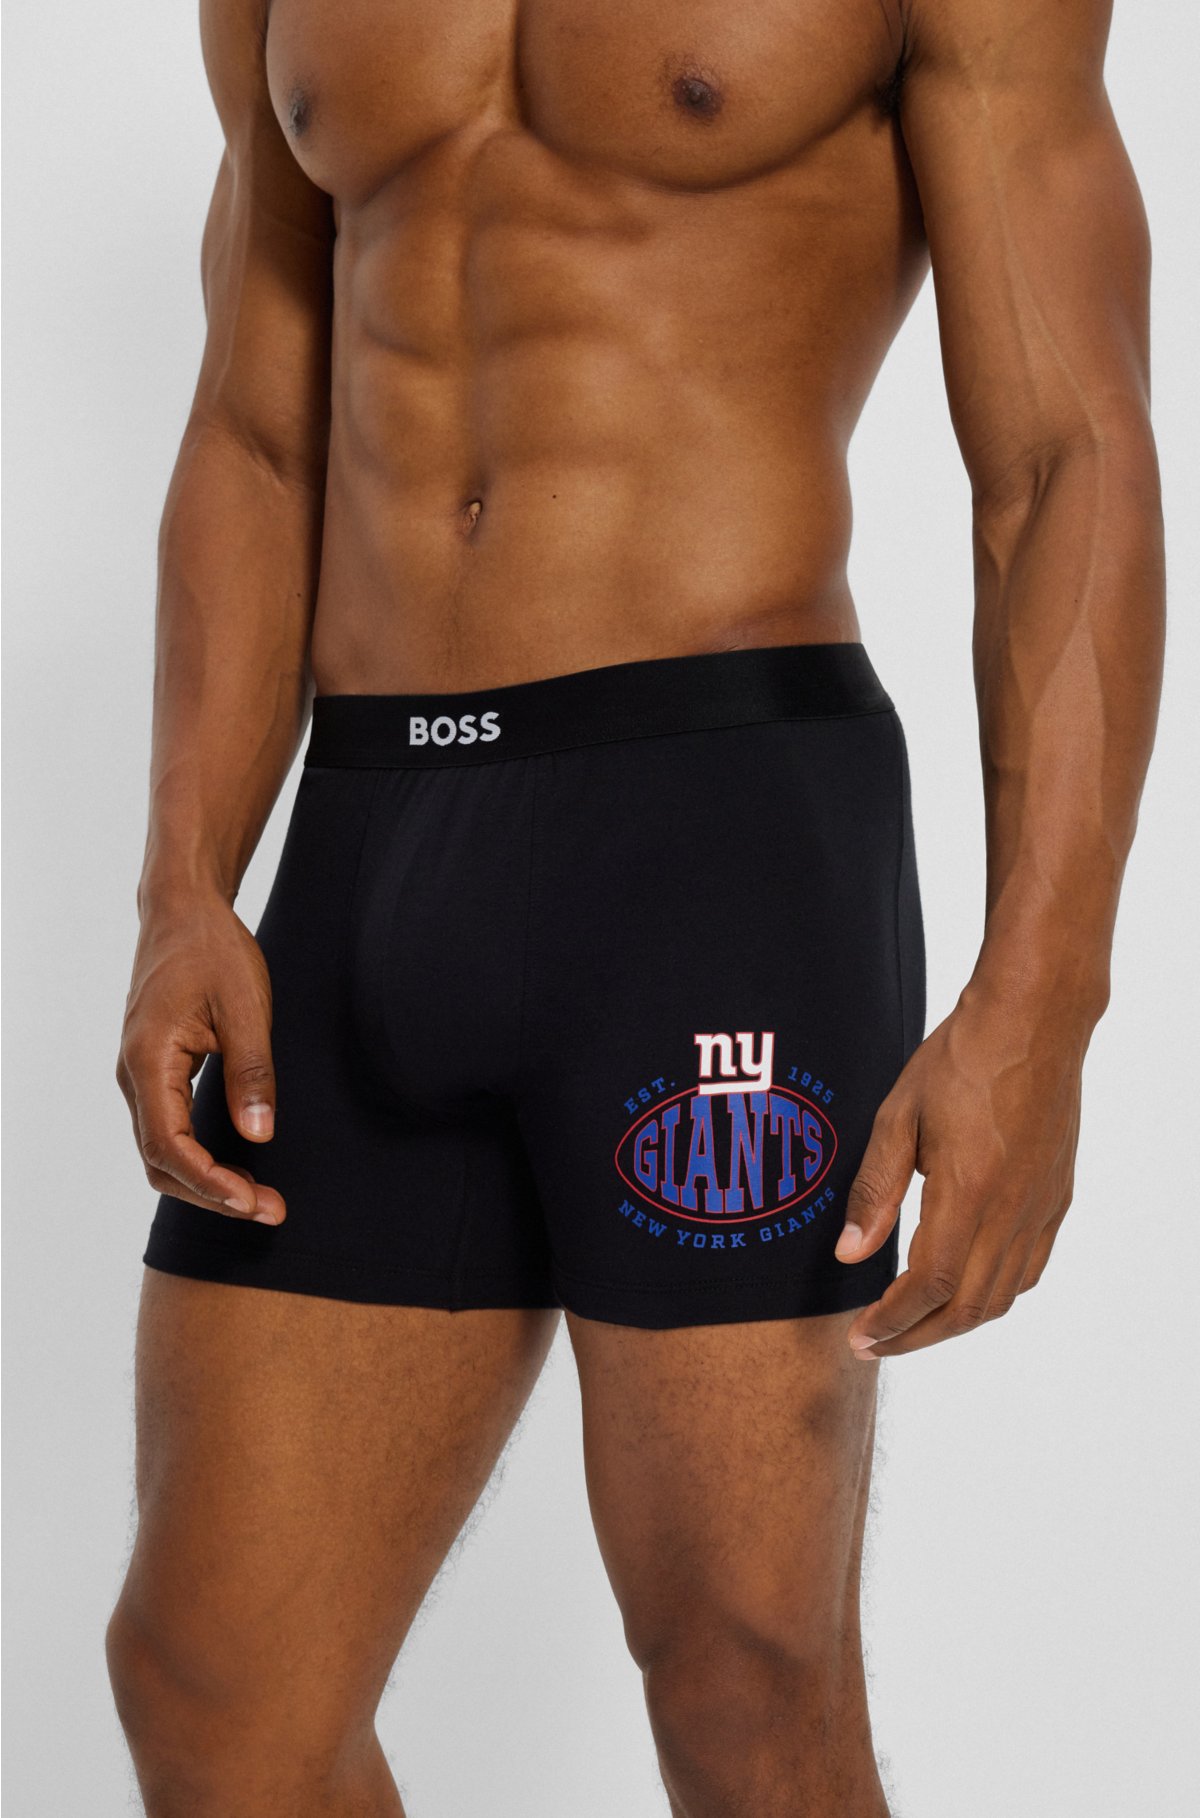 New York Giants Mens Underwear, Giants Boxers and Briefs